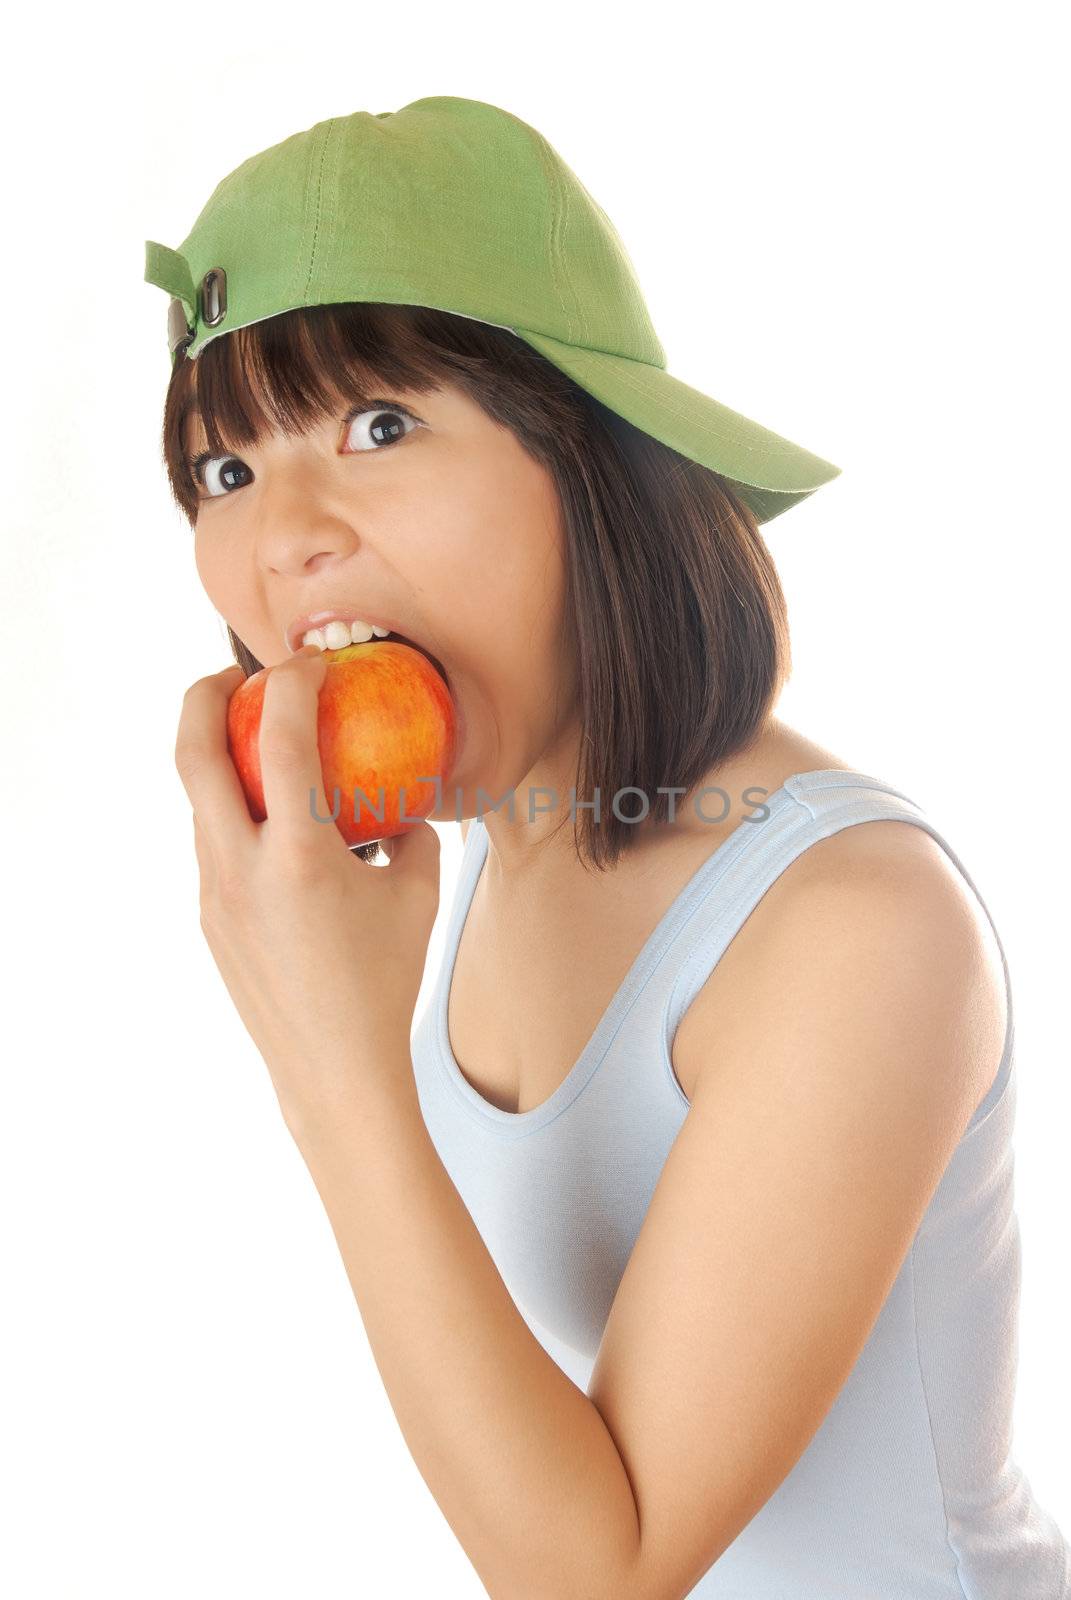 Photo of the hungry model eating fresh apple